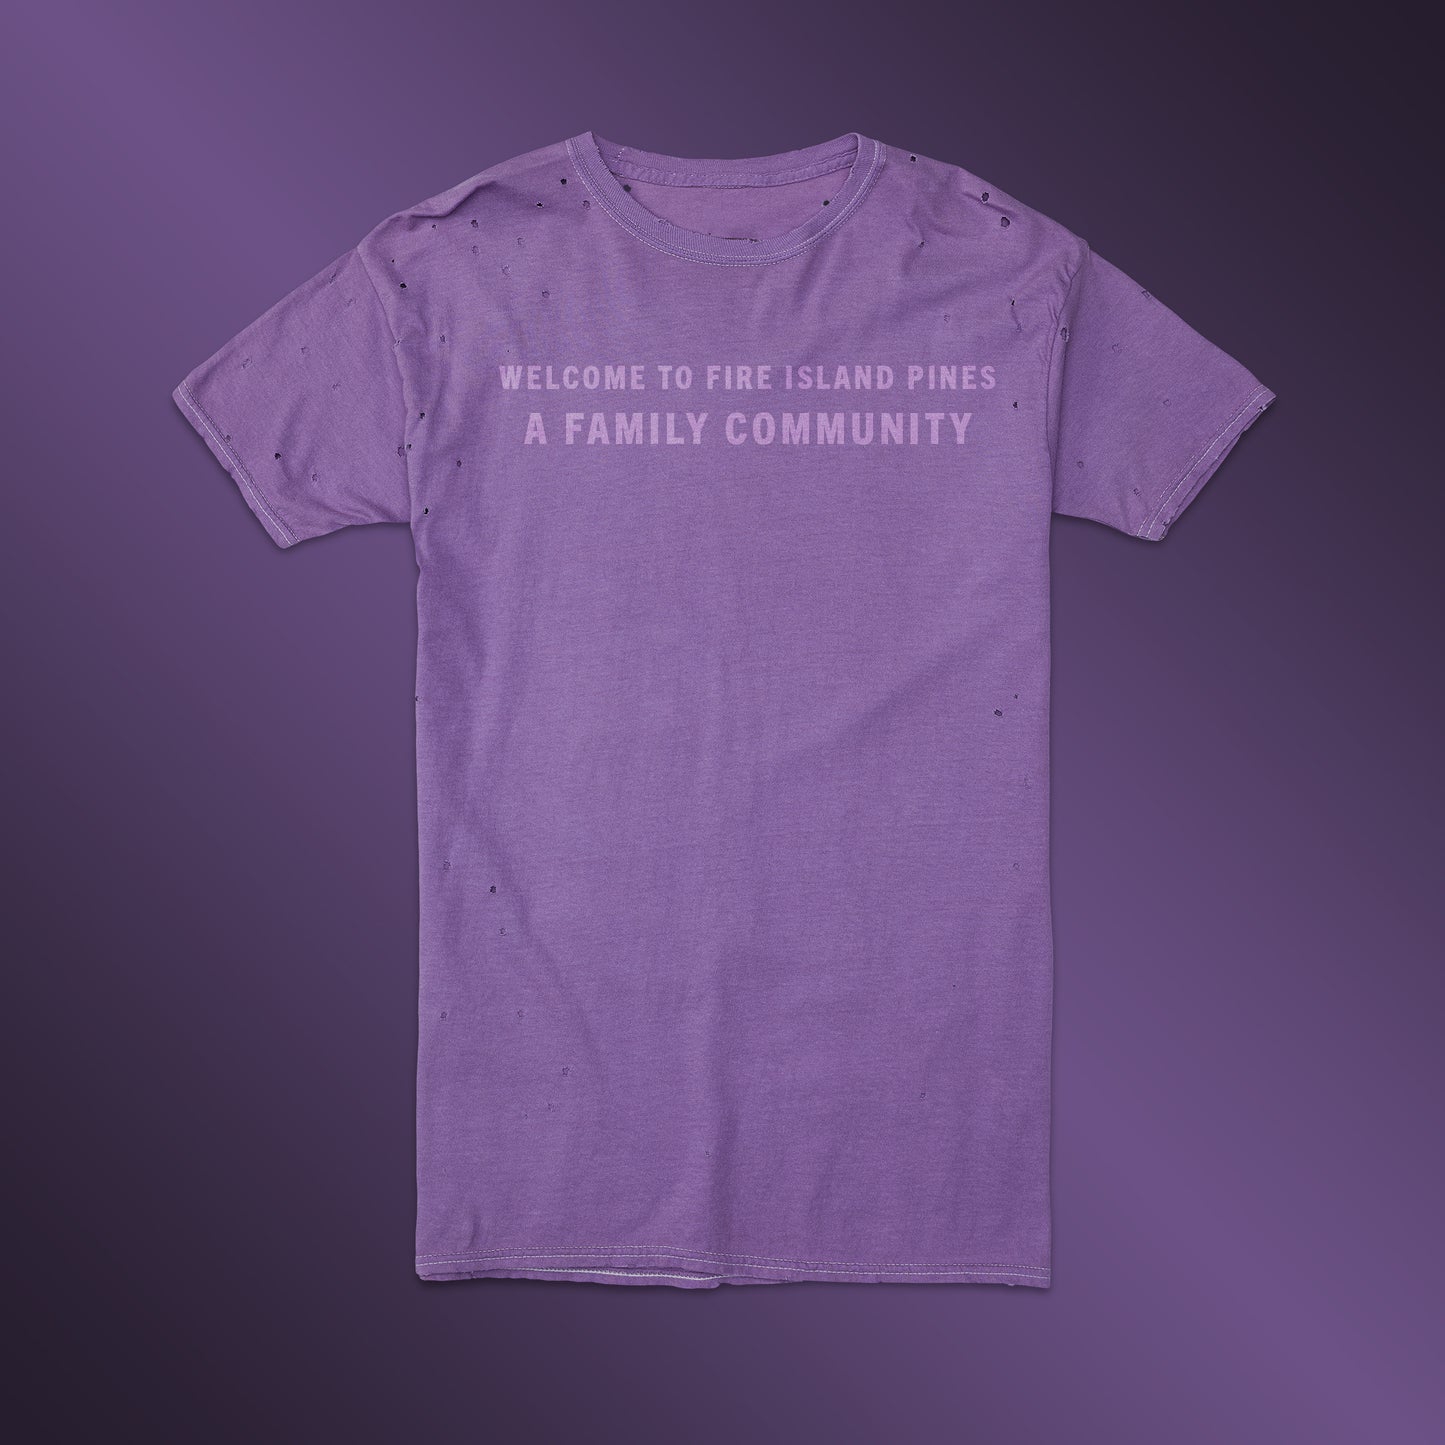 Future Vintage Tee: "FIP: A Family Community"